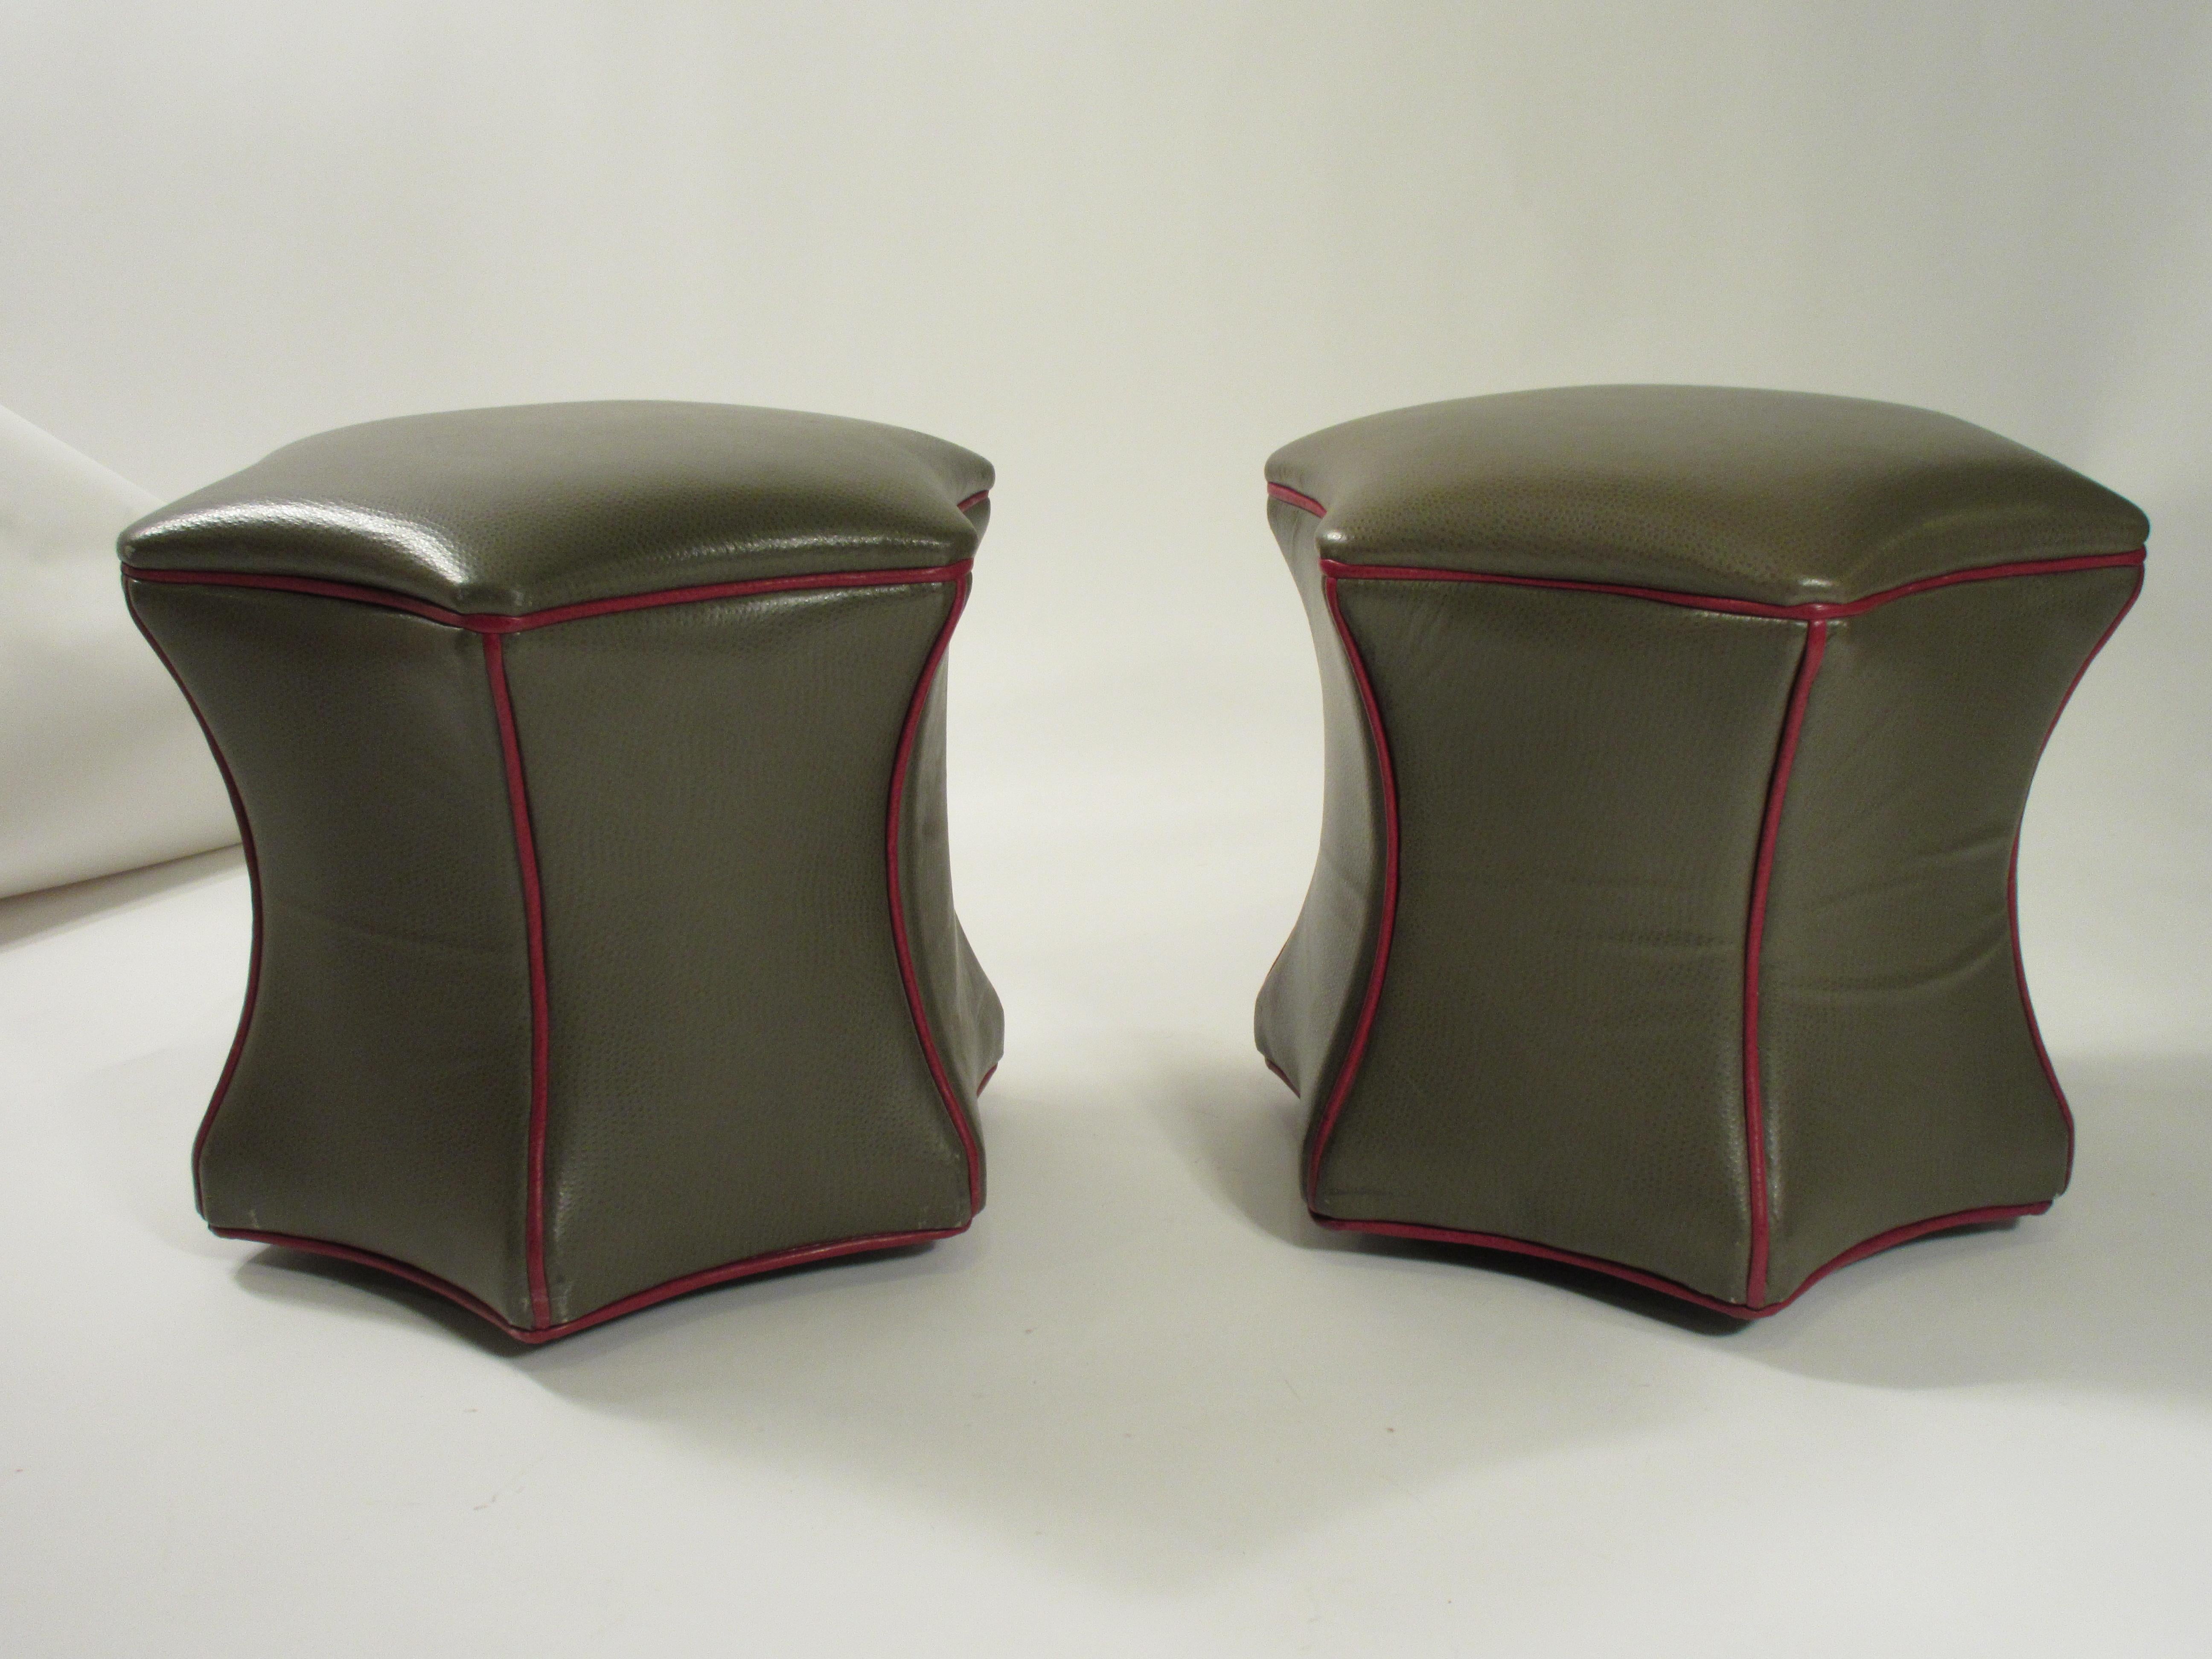 Pair of leather ottomans on wheels.